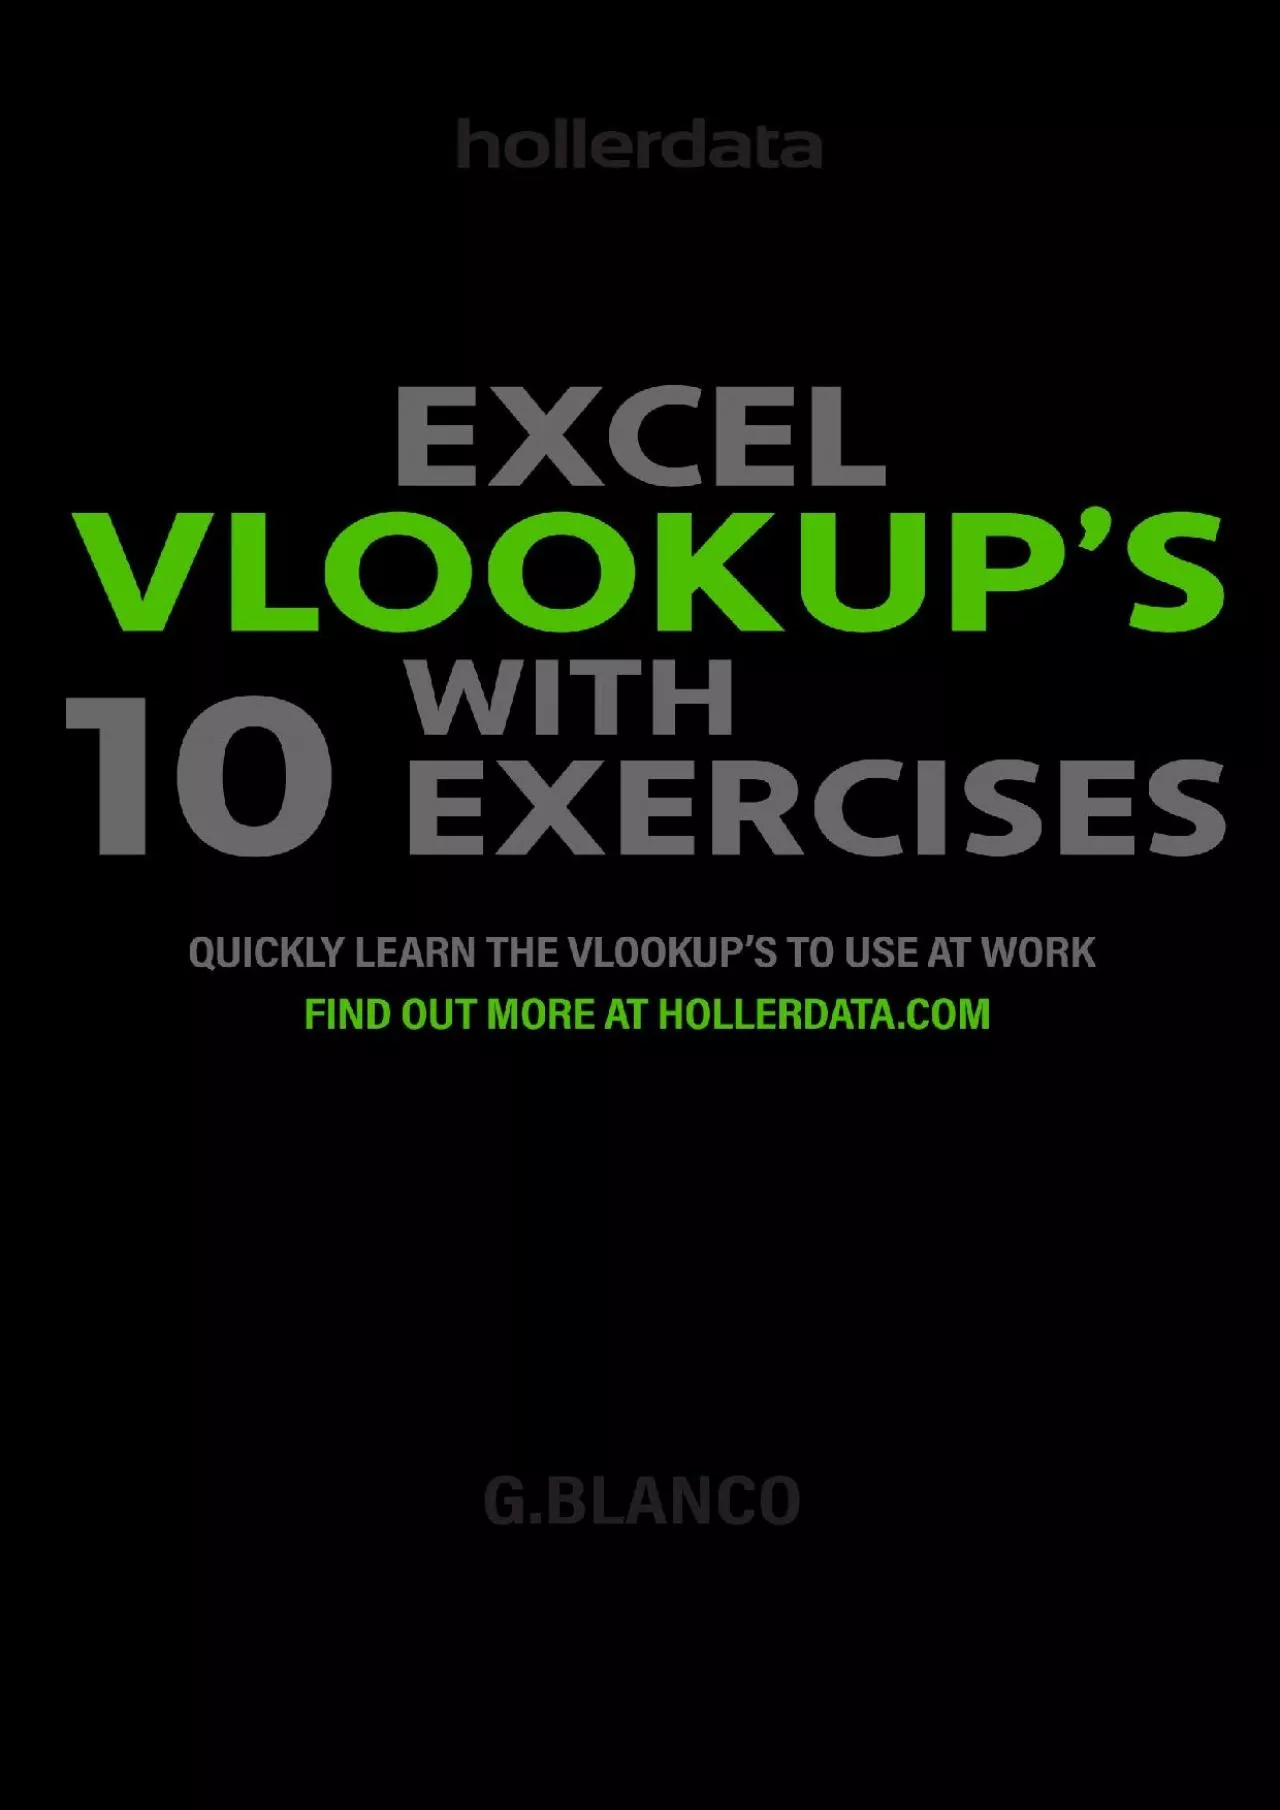 (BOOK)-Excel VLOOKUP\'S with 10 Exercises: Quickly Learn the Vlookup to use at Work.